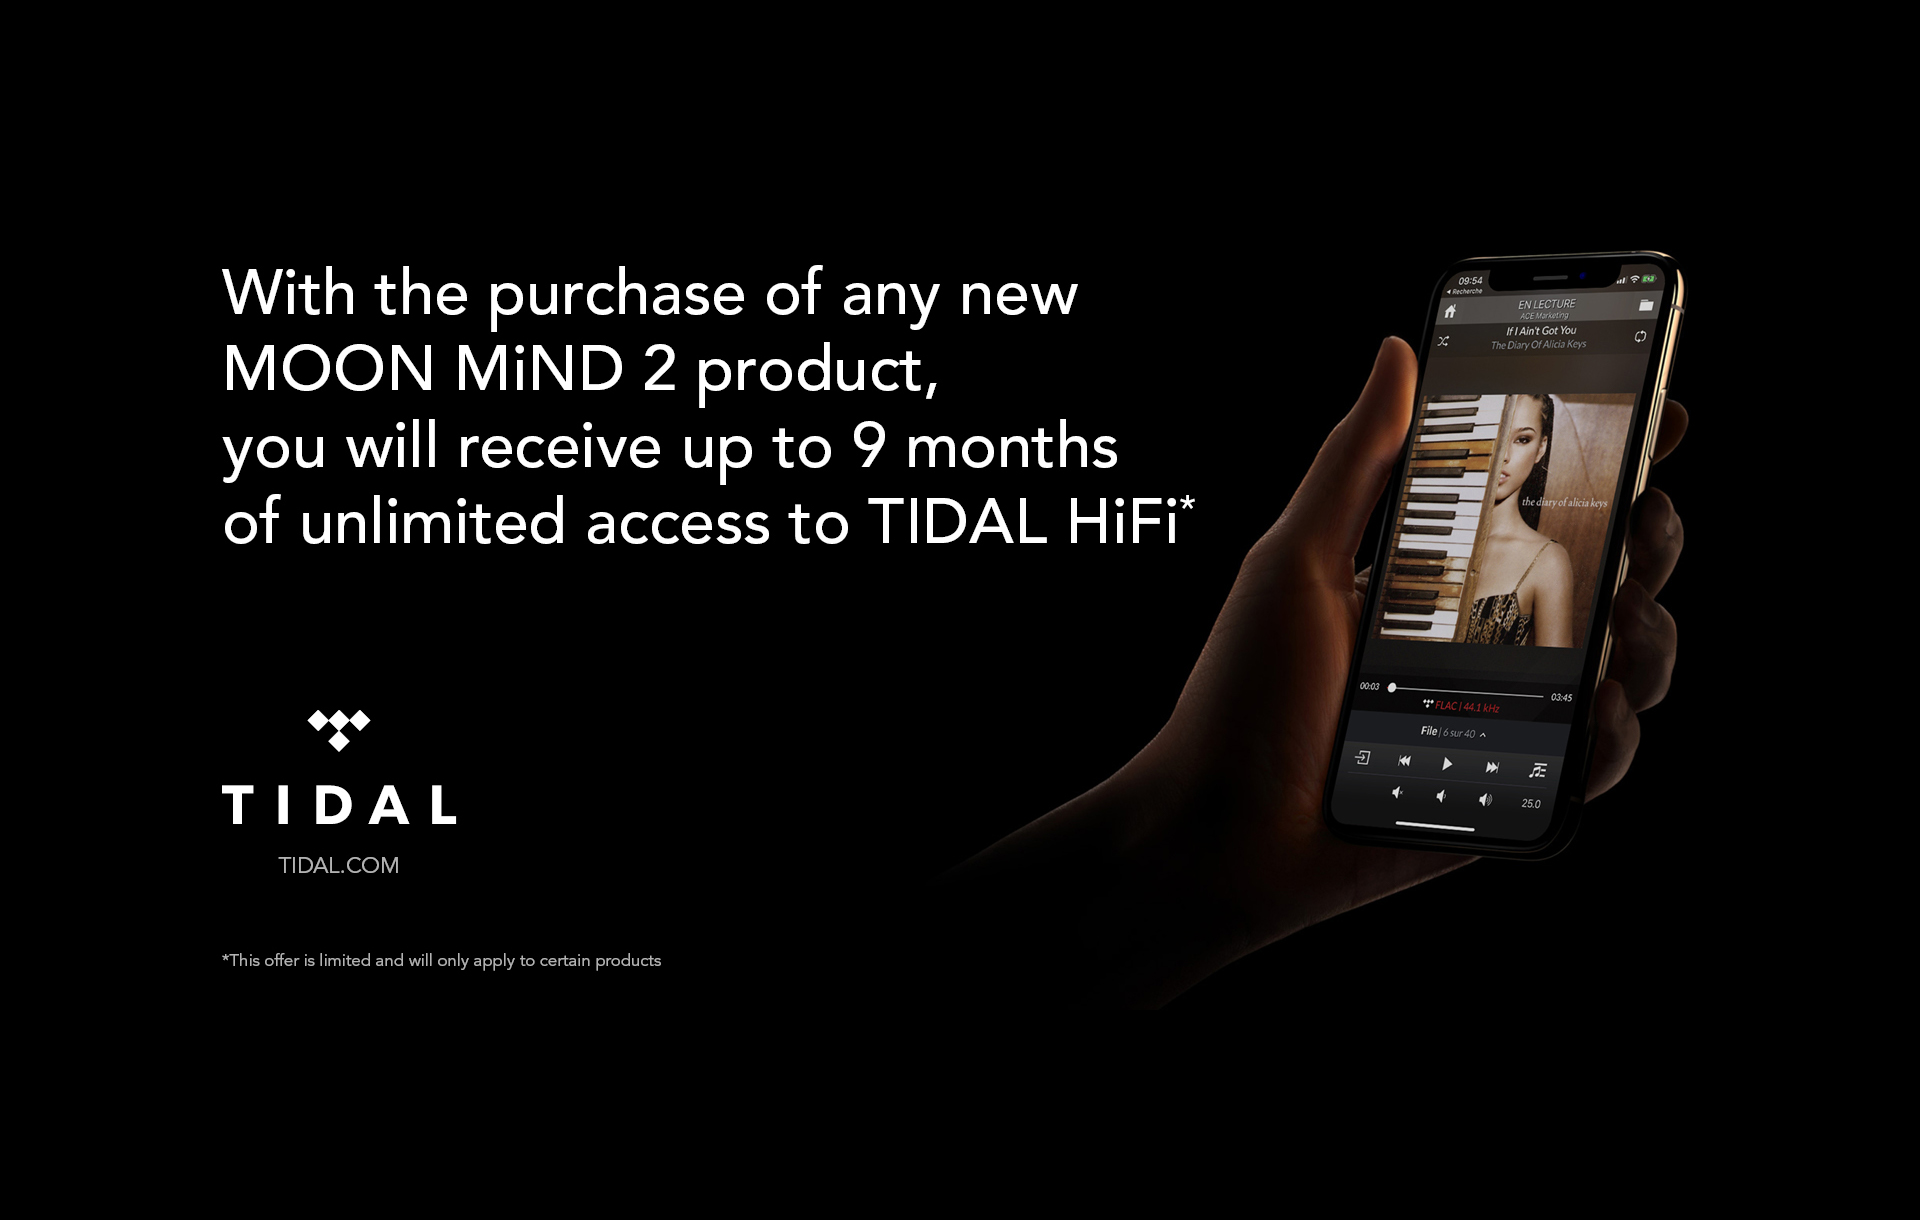 with the purchase of any new moon mind 2 product, you will receive up to 9 months of unlimited acces to tidal hifi